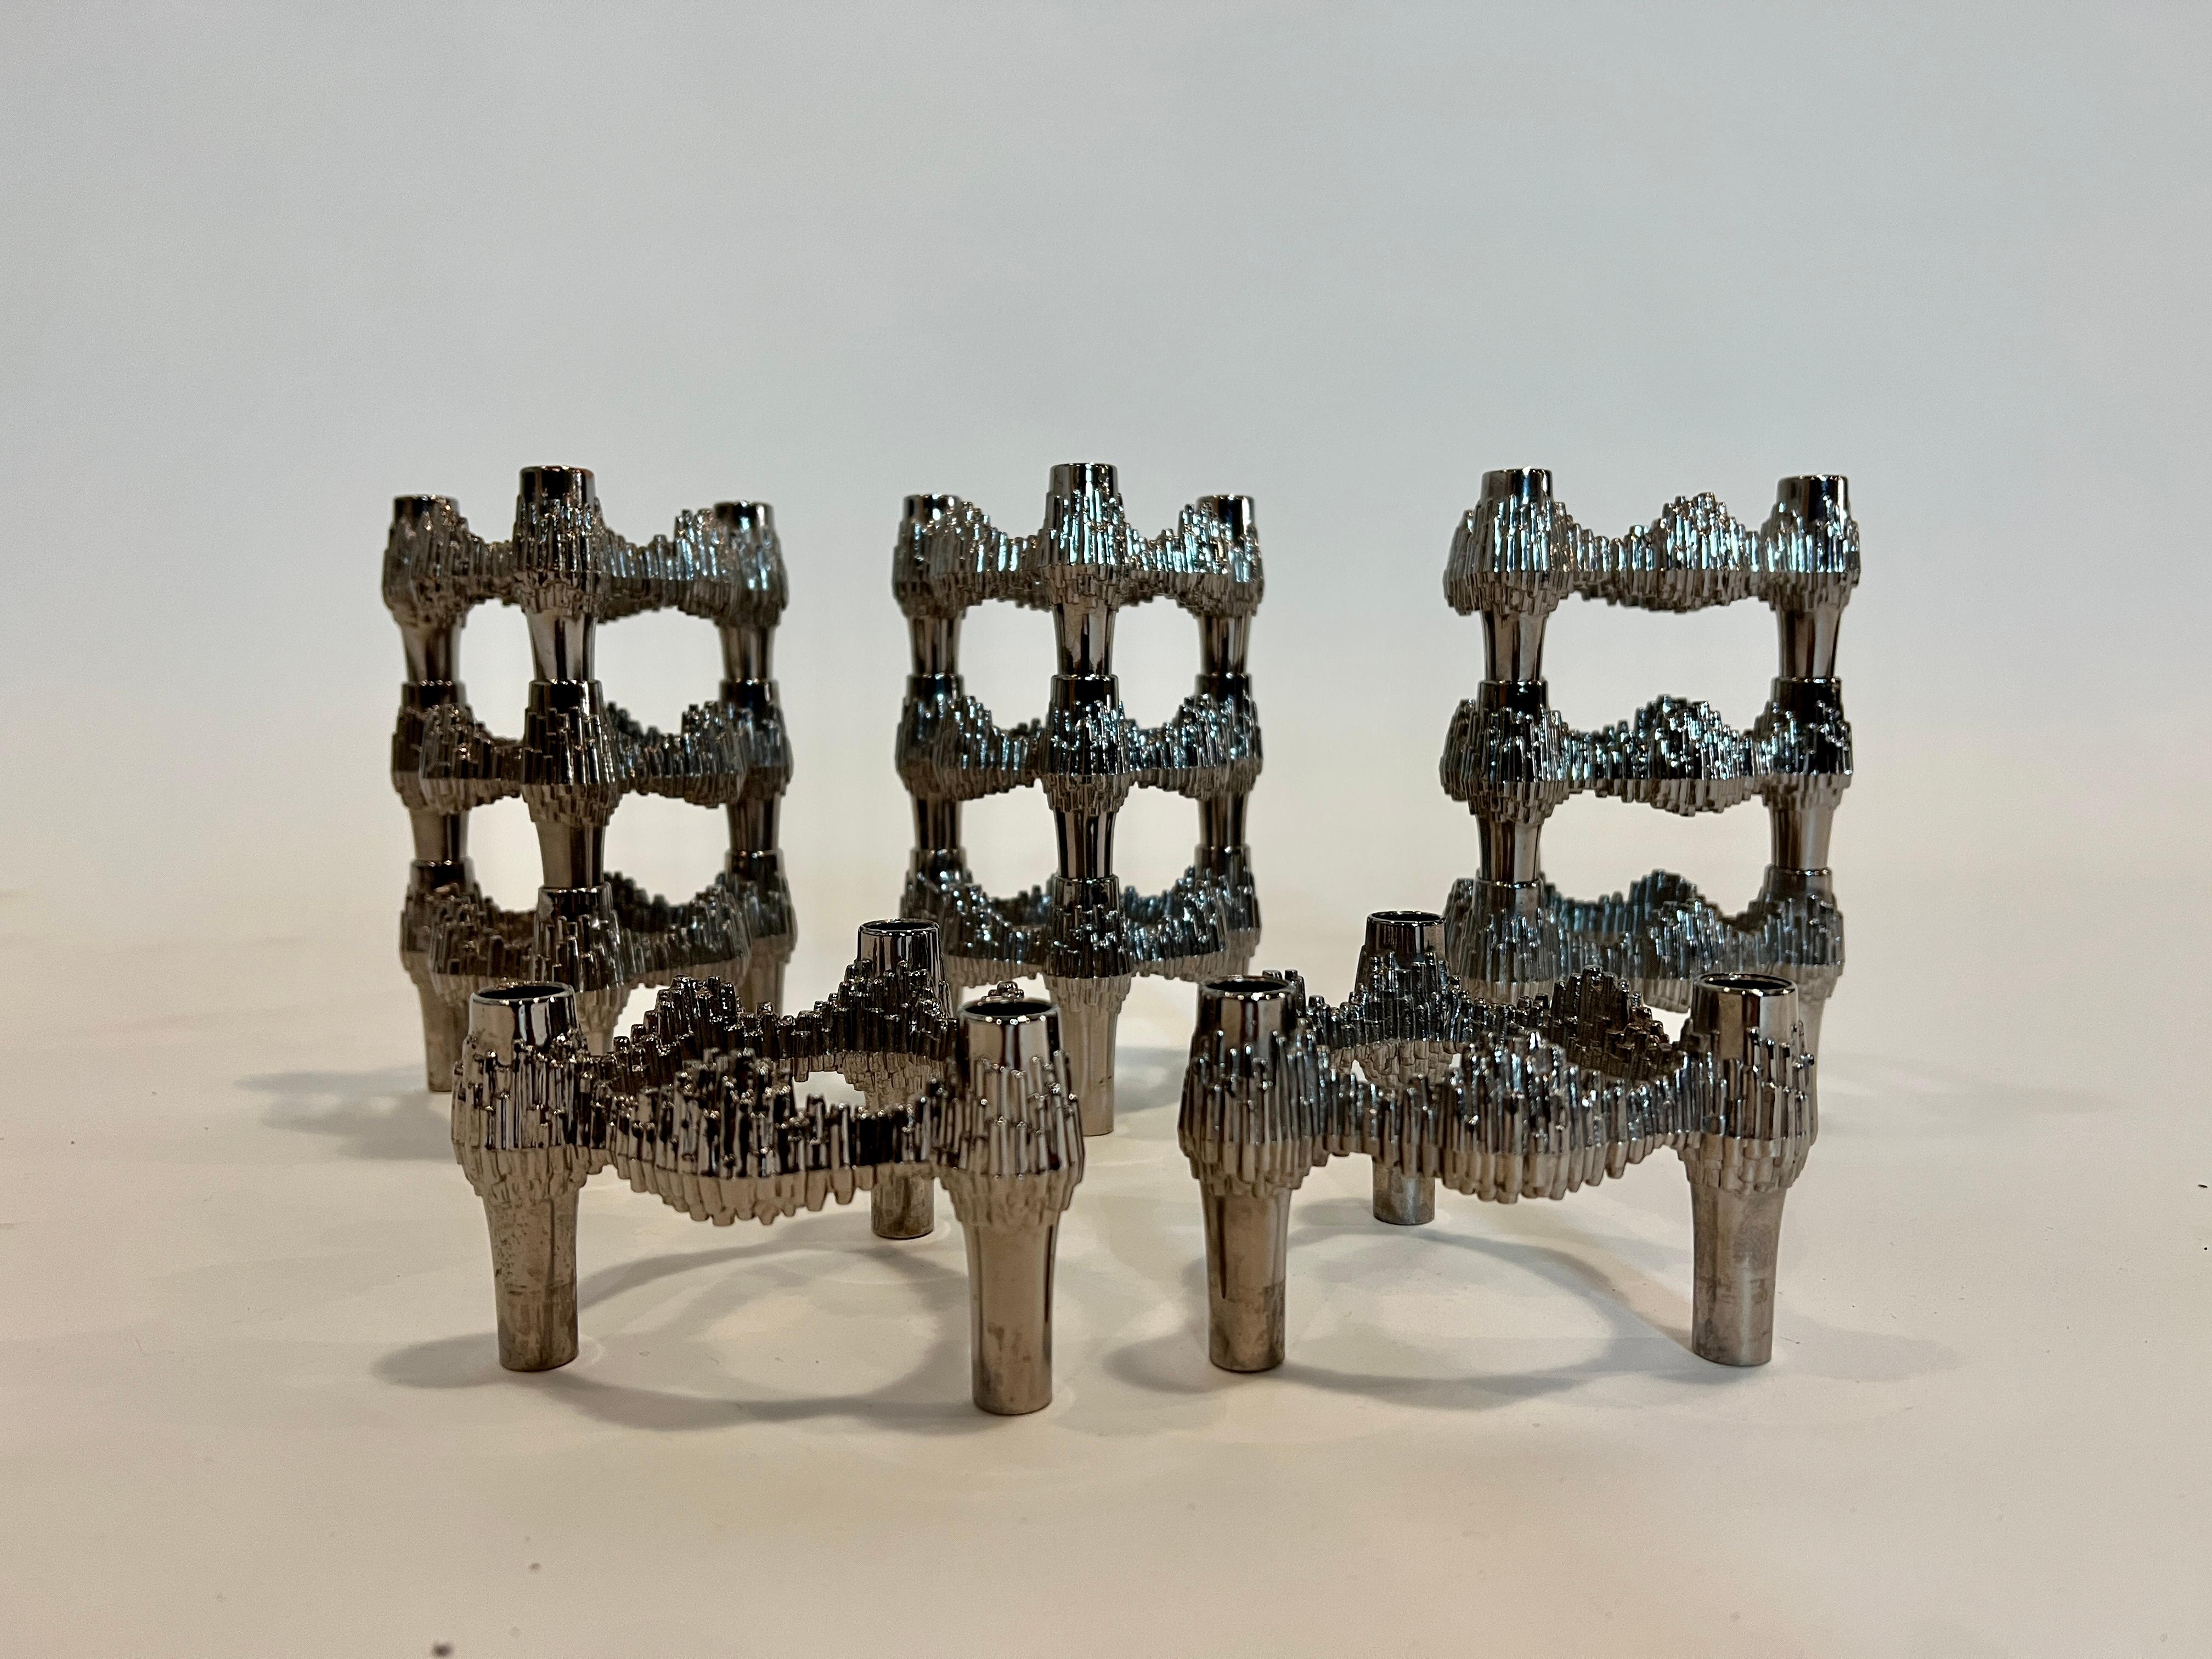 Set of 11 brutalist style nickel-plated Variomaster candleholders designed by Caesar Stoffi & Fritz Nagel. Manufactured by Quist/BMF in West Germany Model: Variomaster-3 flame.